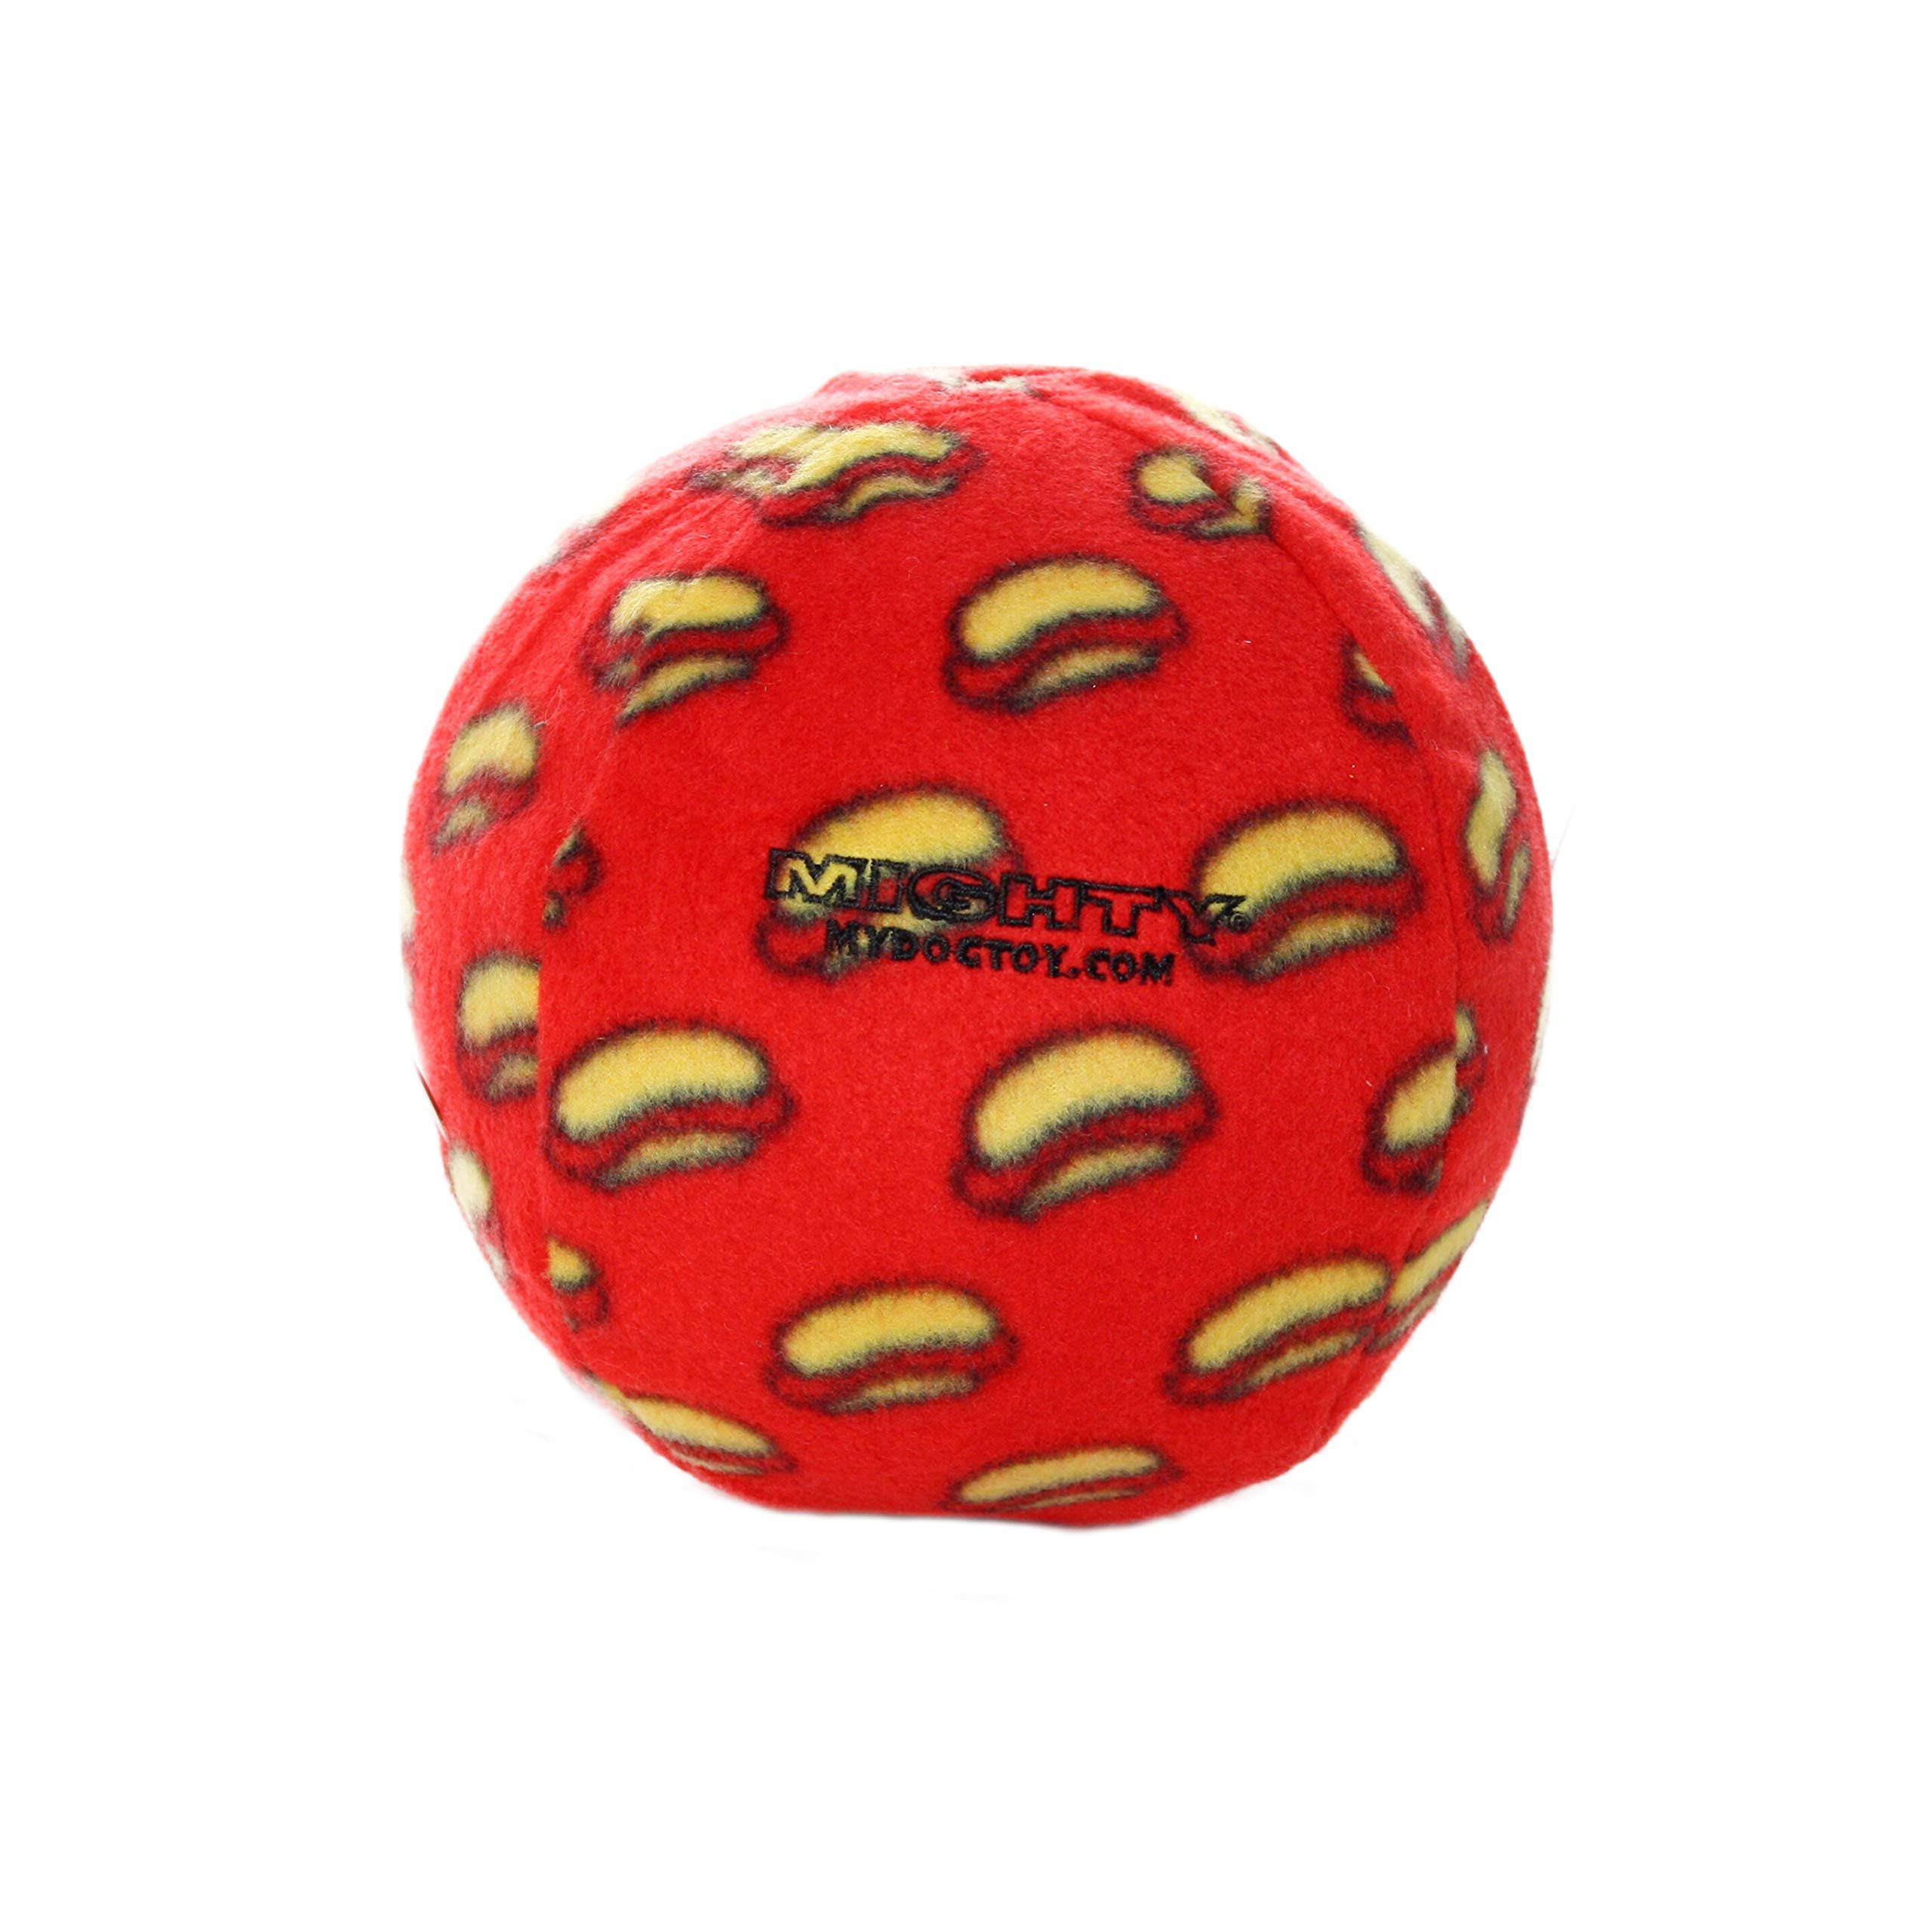 Mighty Ball Dog Toy - Red, Large